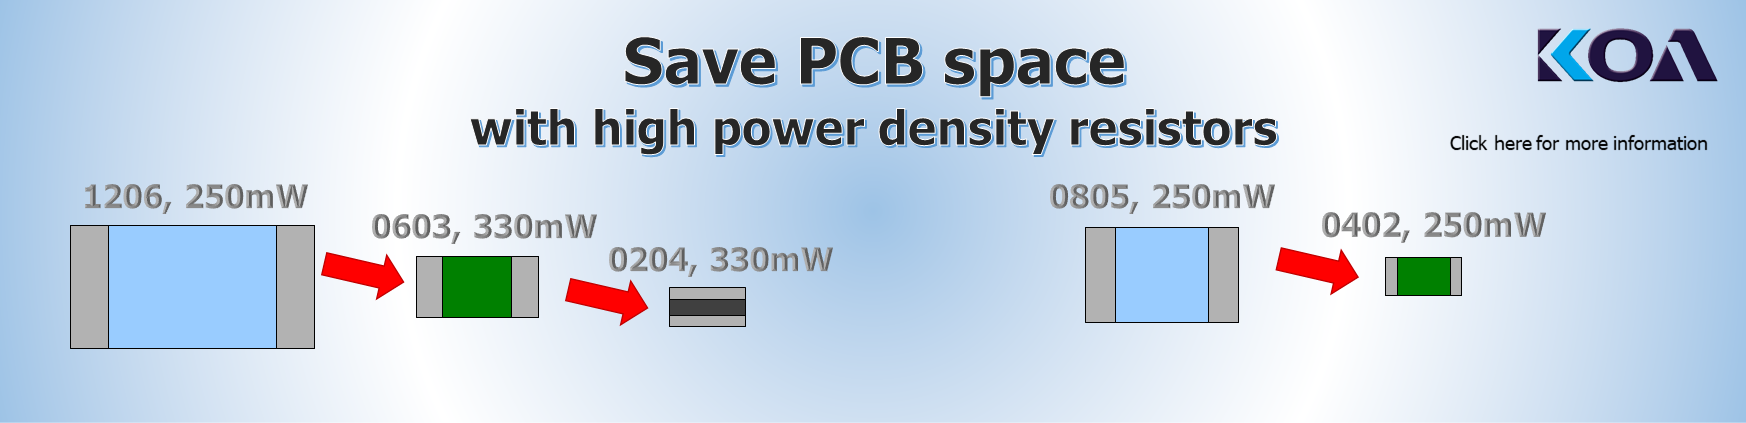 Save PCB Space